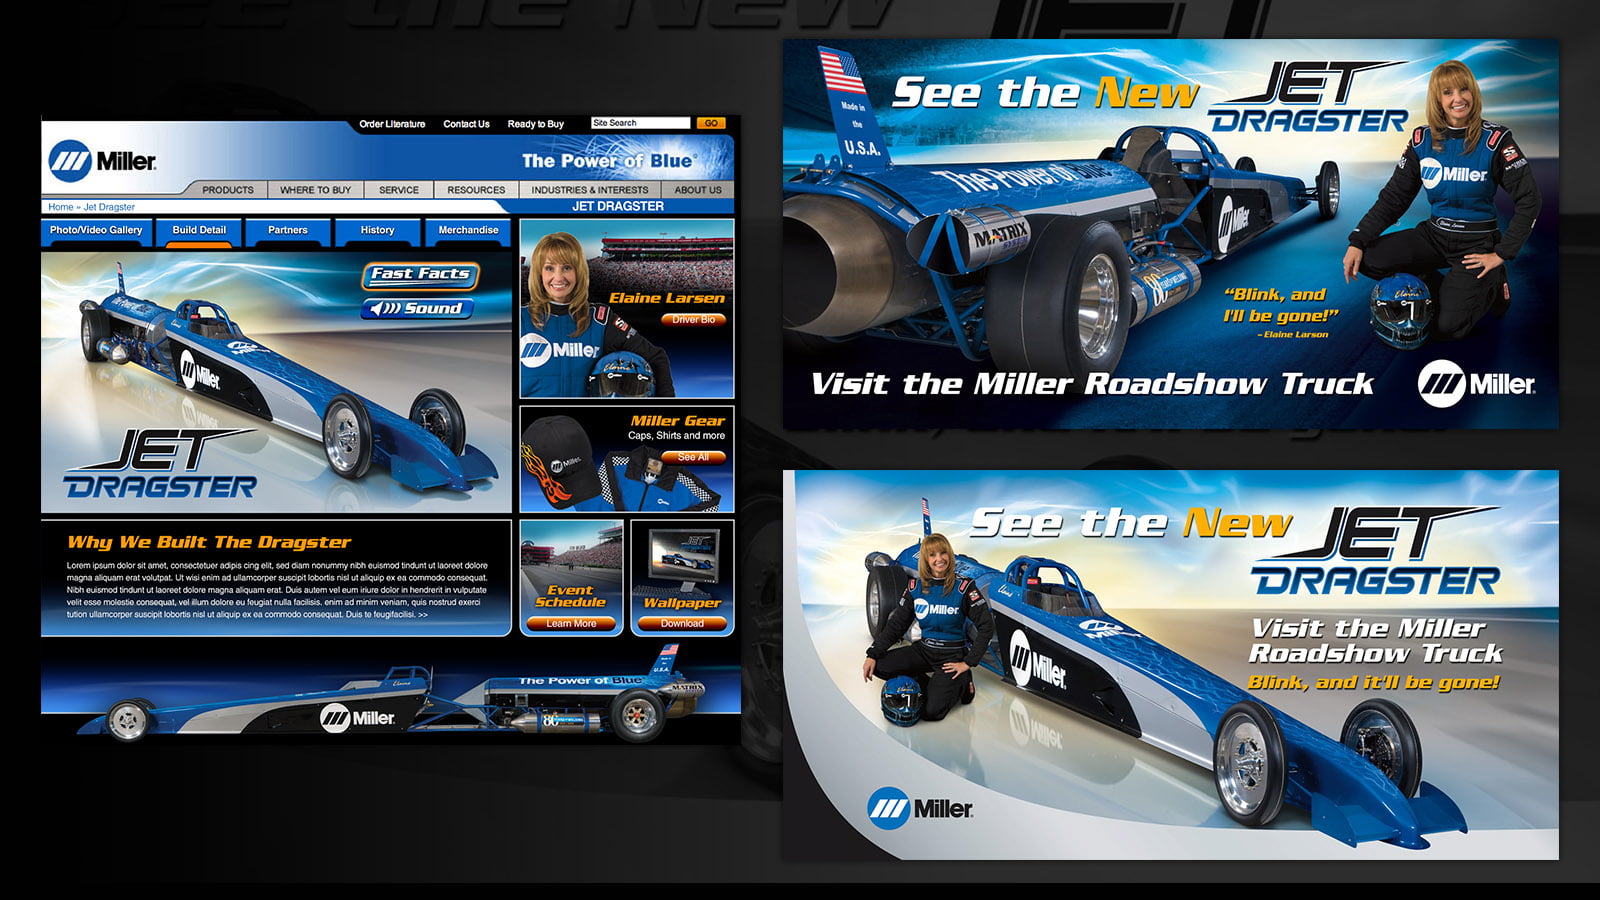 Promotional Campaign Jet Dragster